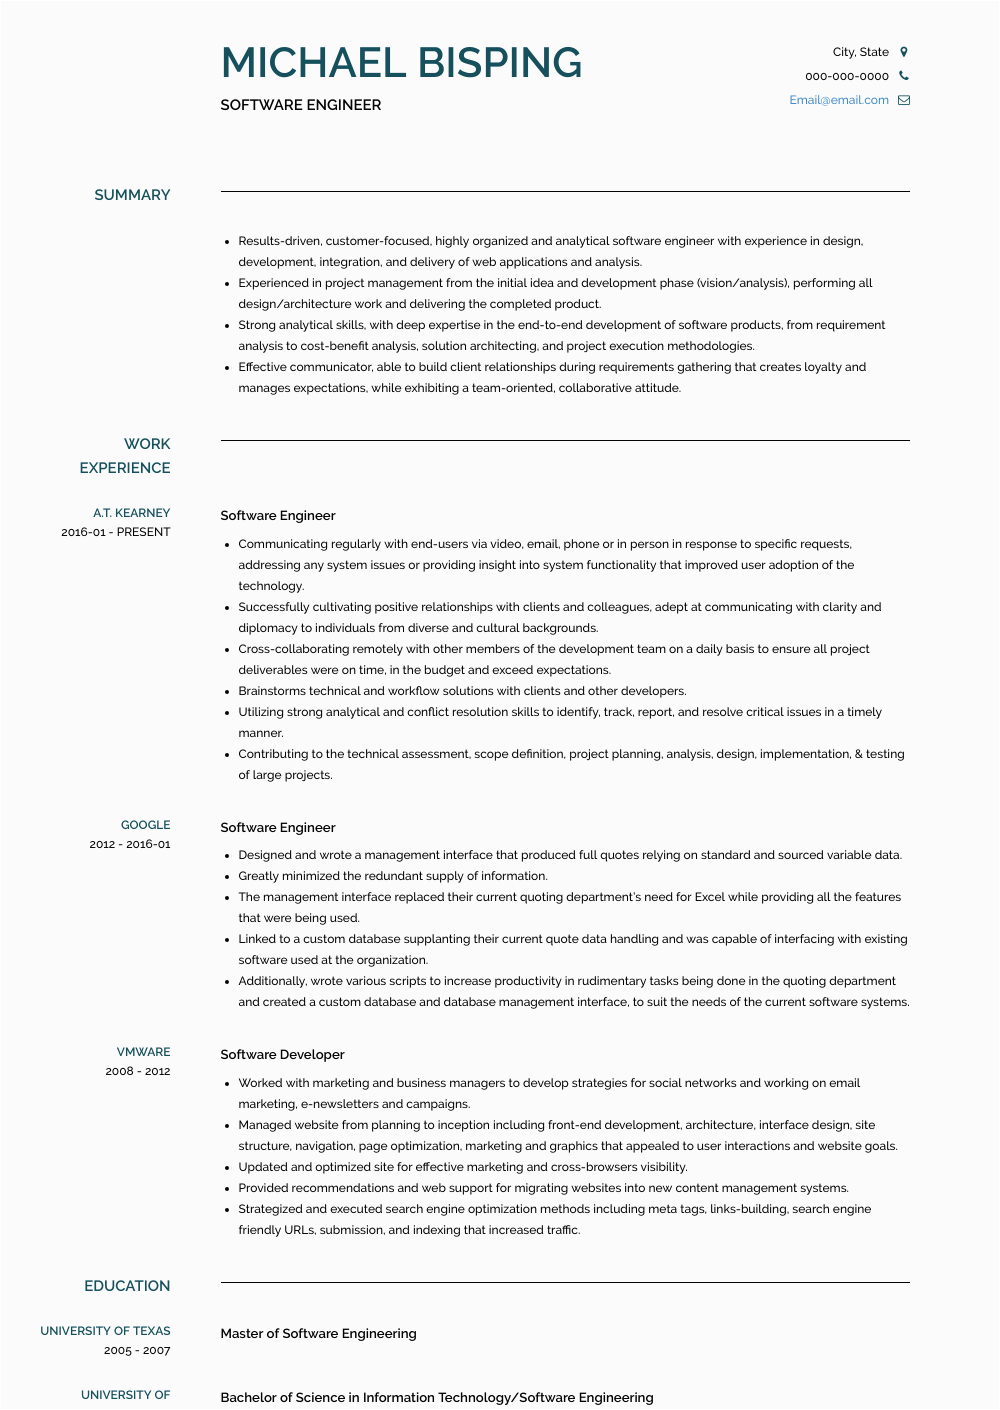 Free Resume Templates for software Engineer software Engineer Cv Template Doc Free Resume for